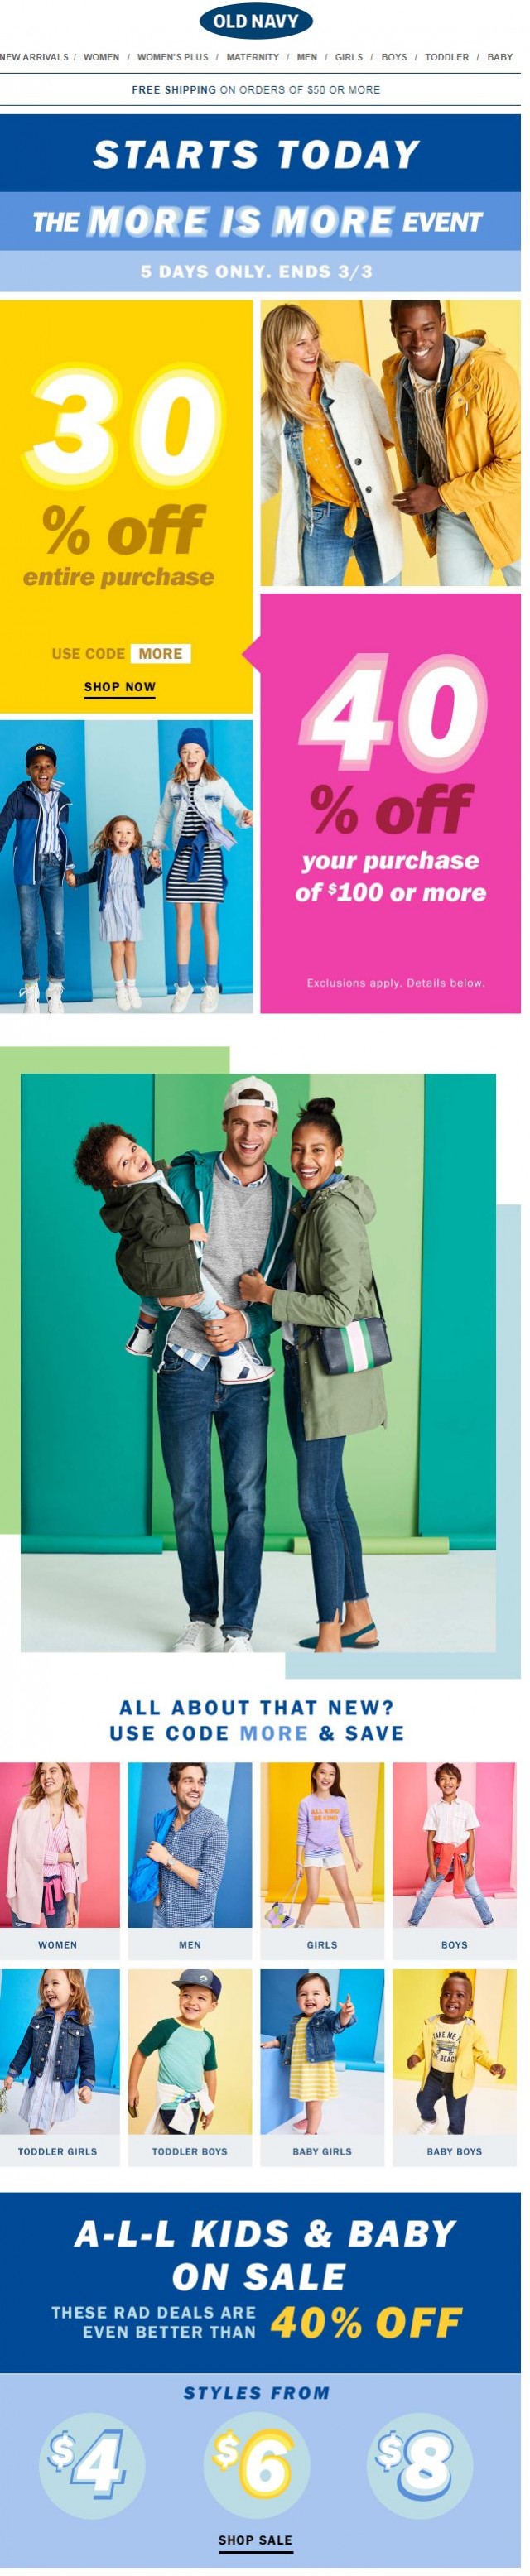 Coupon for: Old Navy Canada - THE MORE IS MORE EVENT, Starts today!